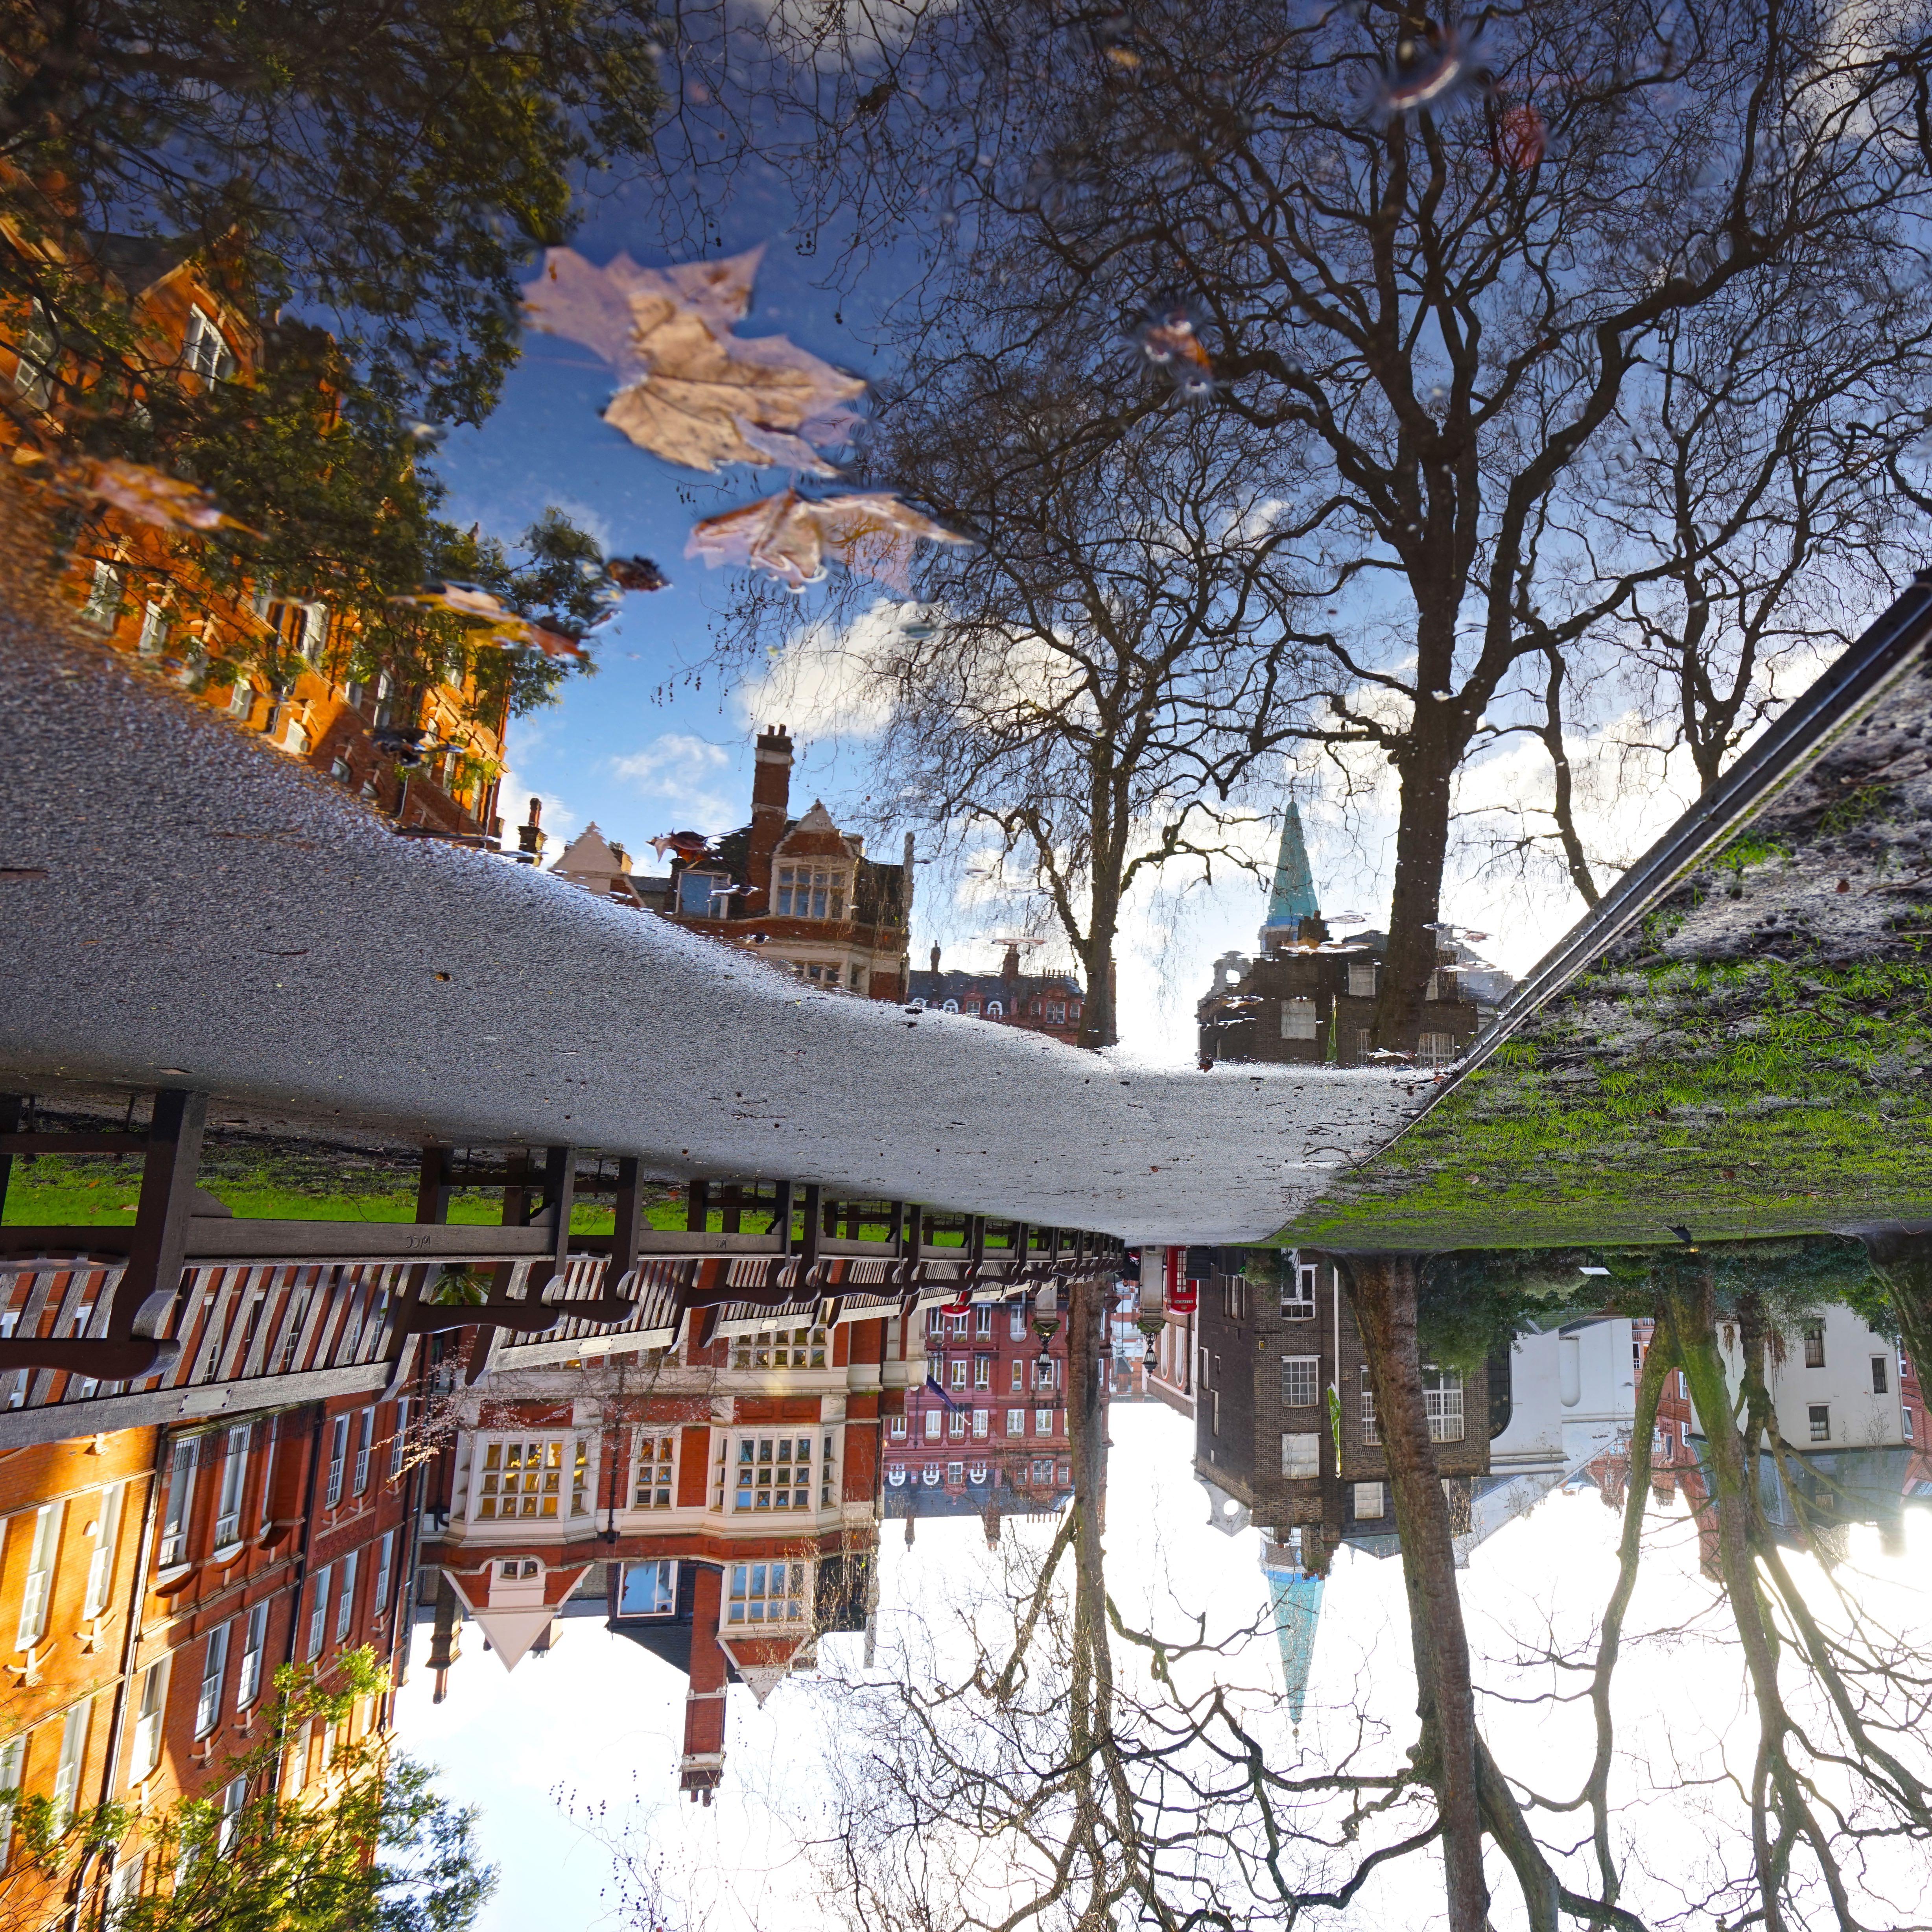 Philip Shalam Abstract Photograph - MOUNT ST. GDNS. PUDDLE REFLECTION - CONTEMPORARY PHOTO - COLOUR PHOTO - RAIN 